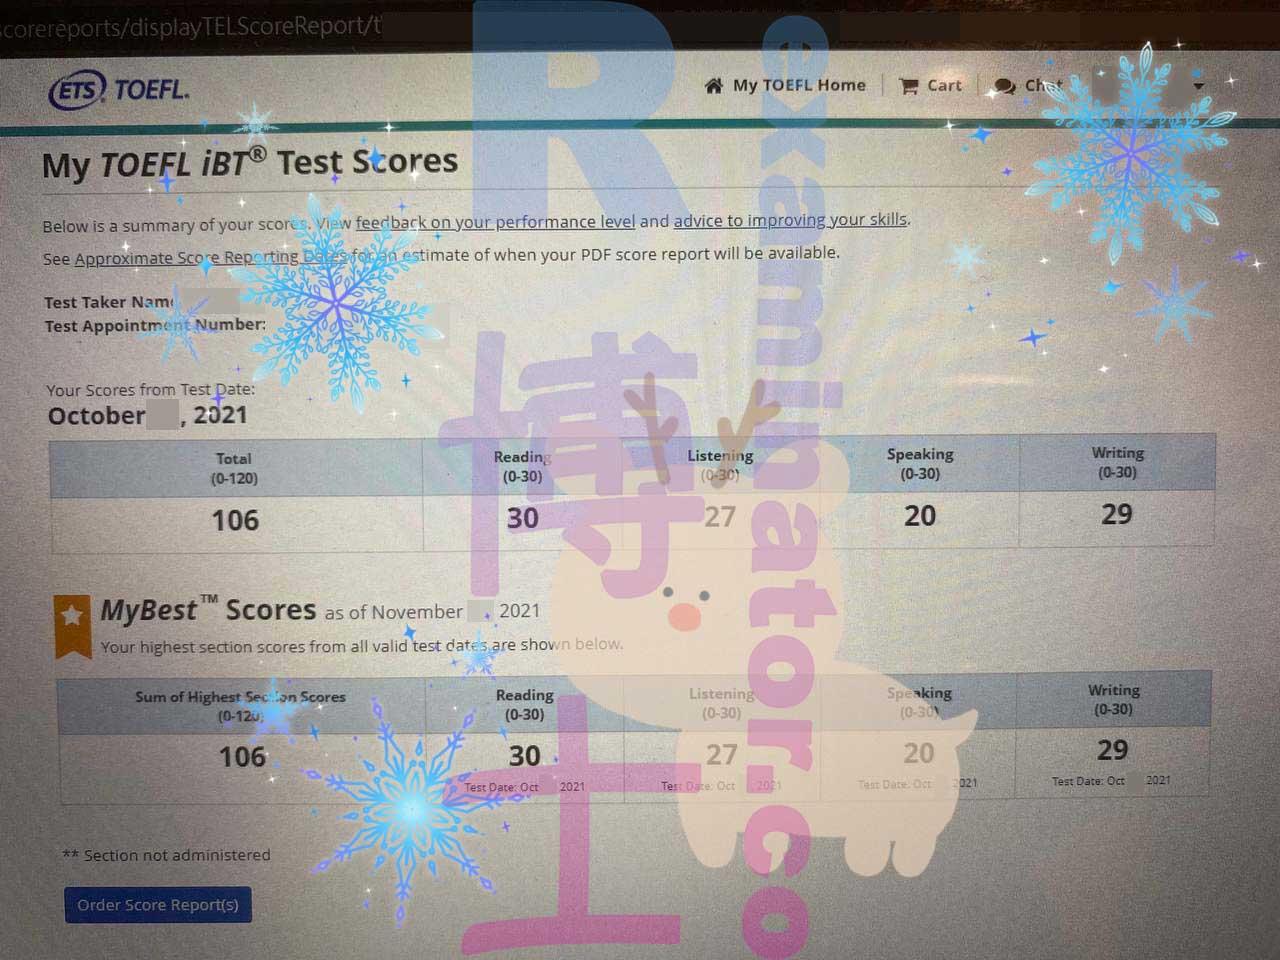 Score image for TOEFL Cheating success story #239